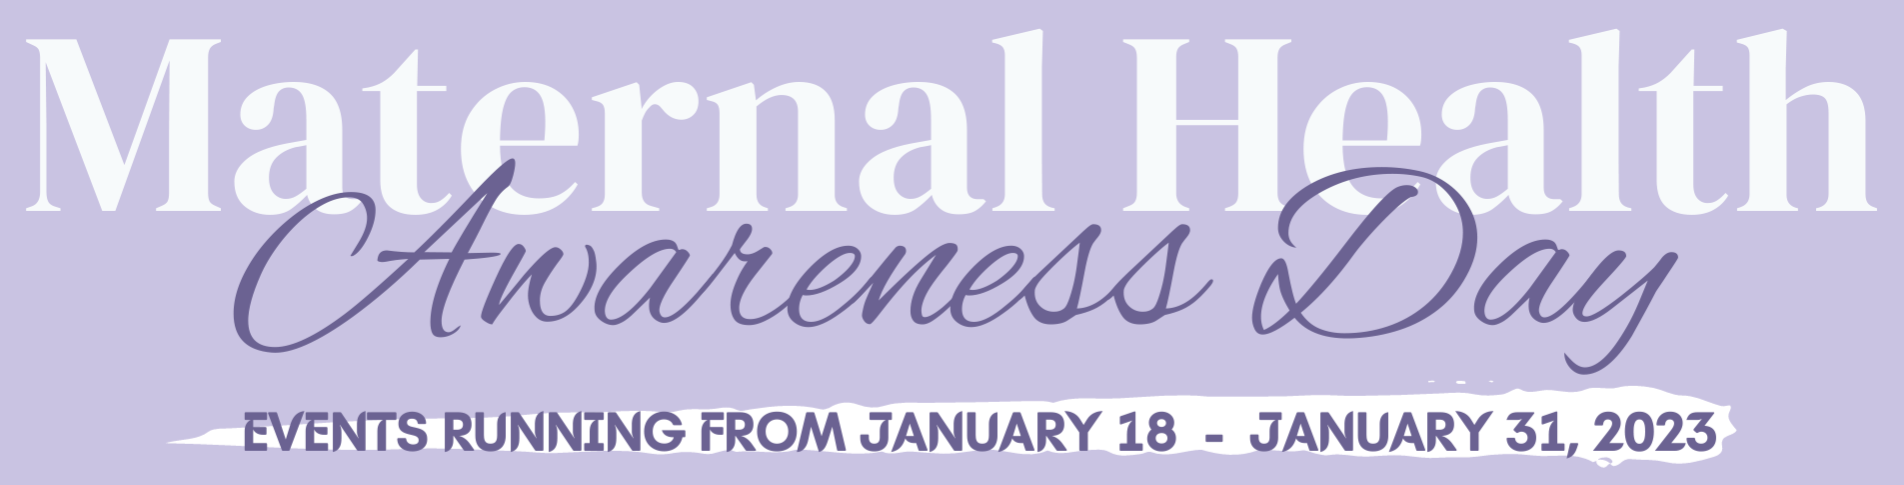 Celebrate Maternal Health Awareness Day with events throughout the state.